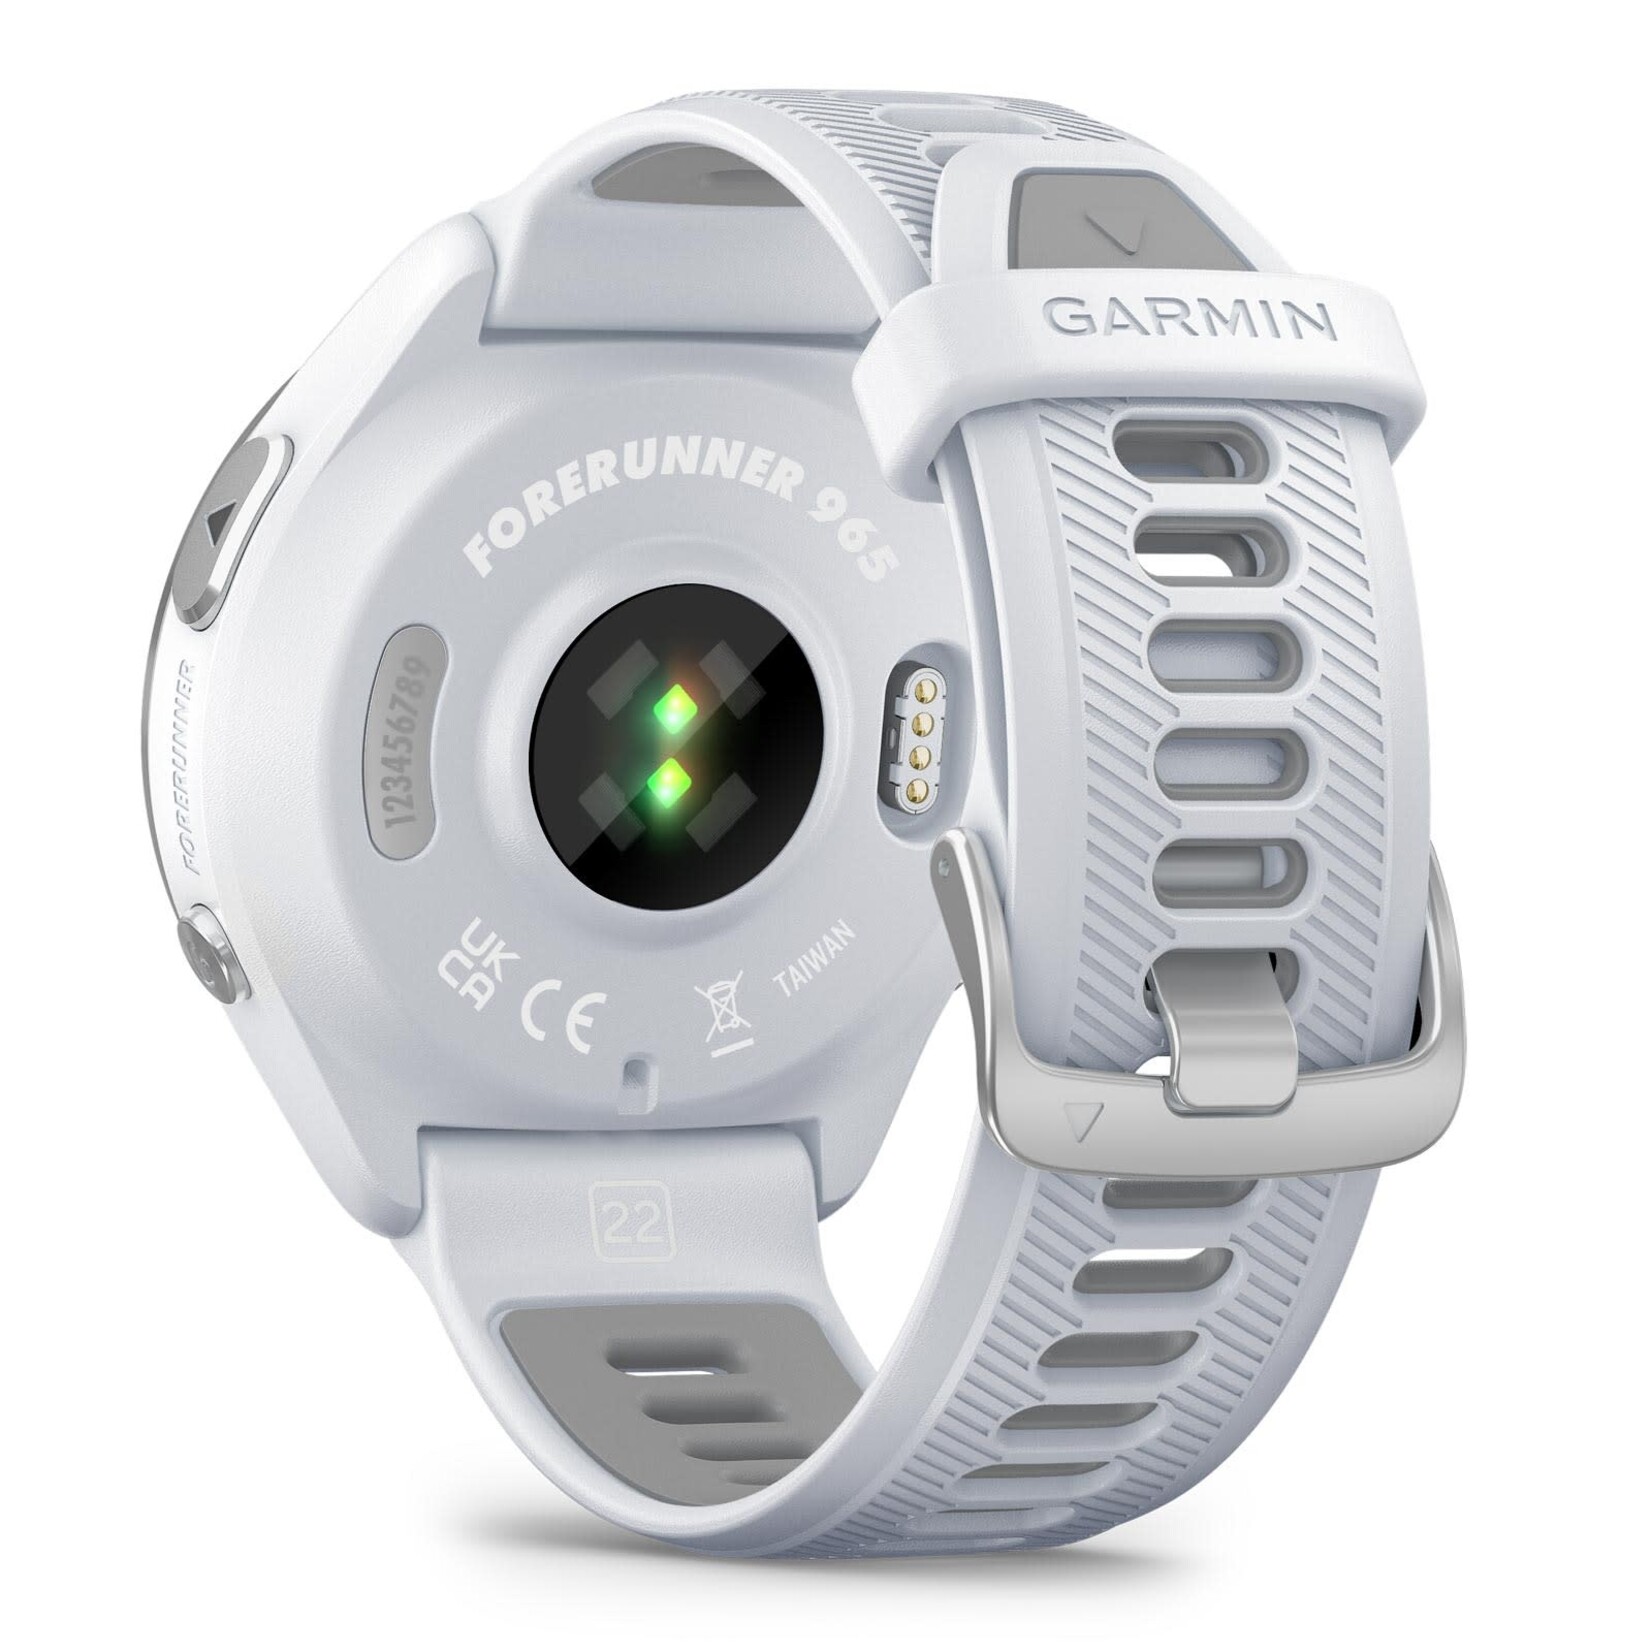 Garmin Forerunner 965 ❌ all the cr*p bits ❌ did I just waste my